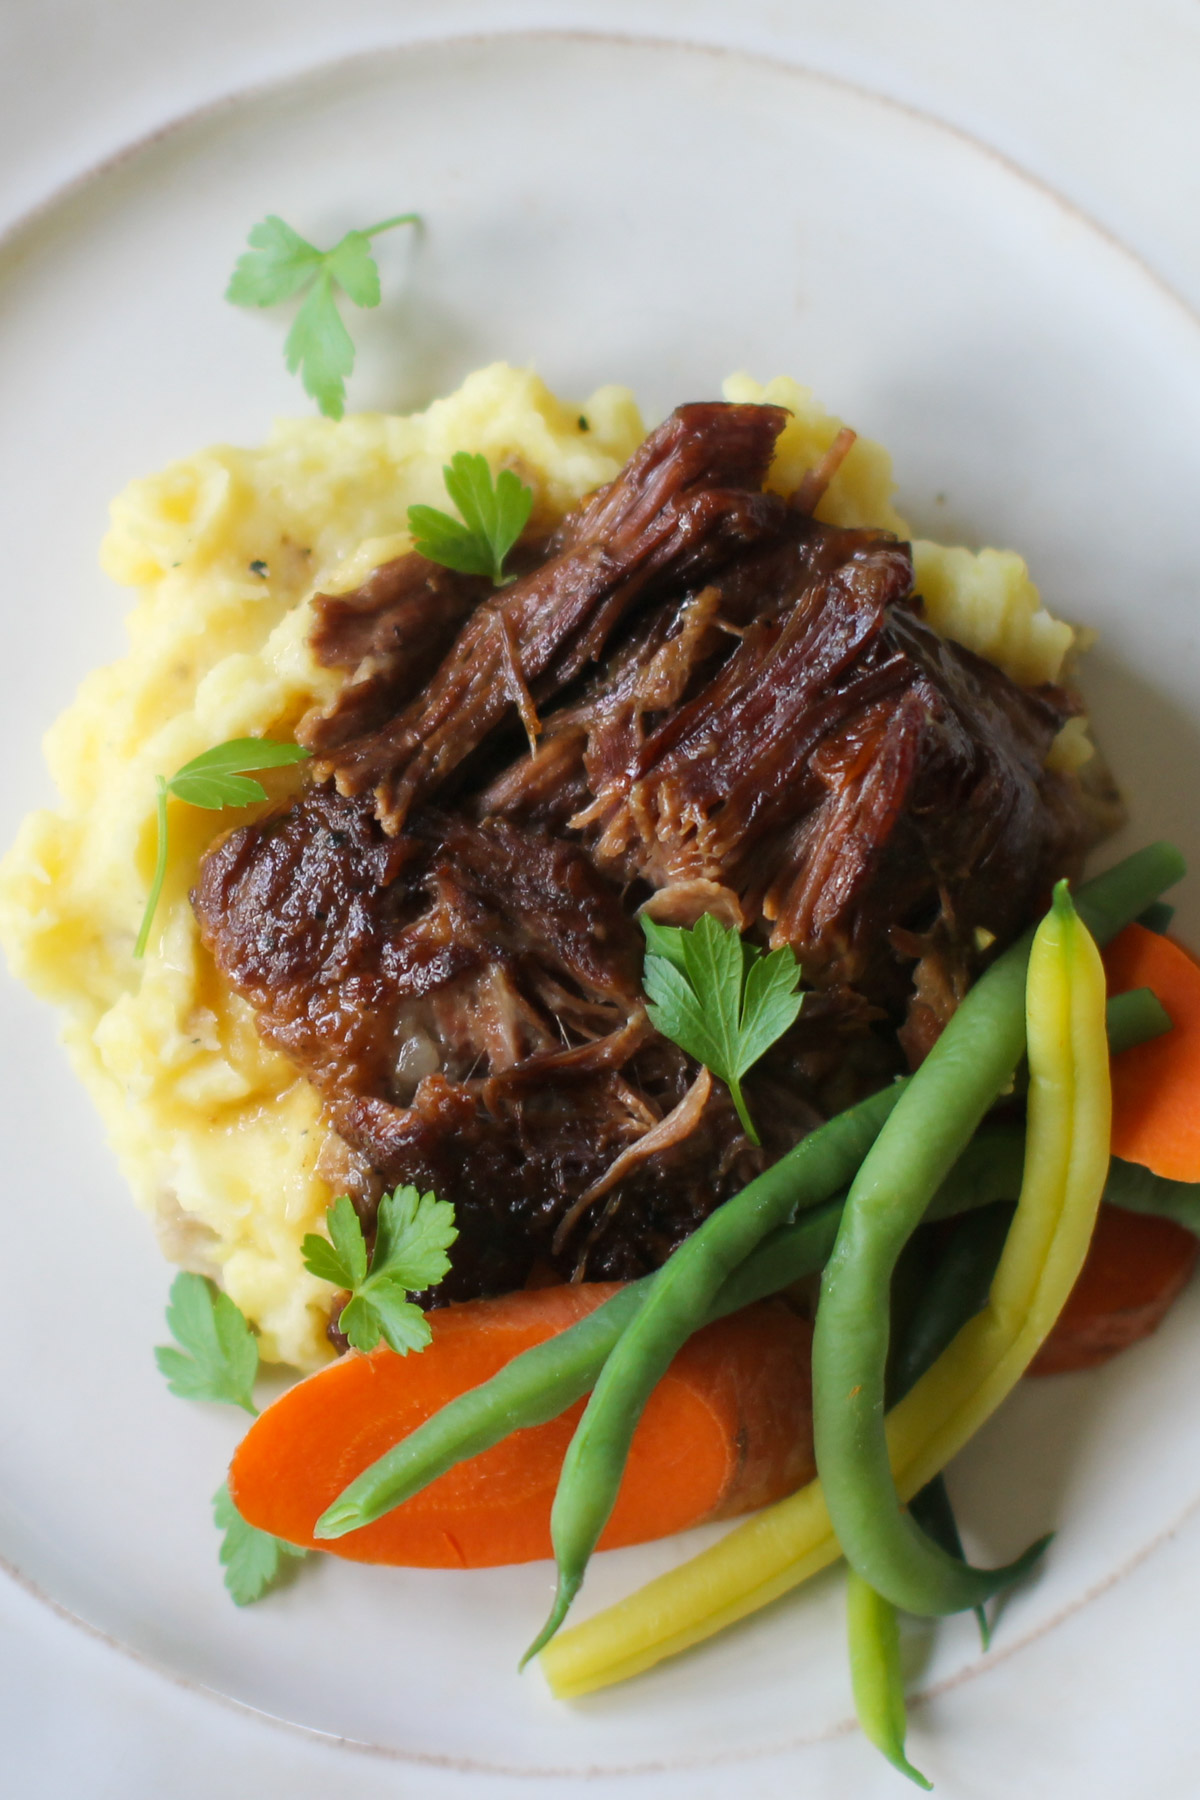 A plate of braised beef roast with mashed potatoes and vegetable sides.